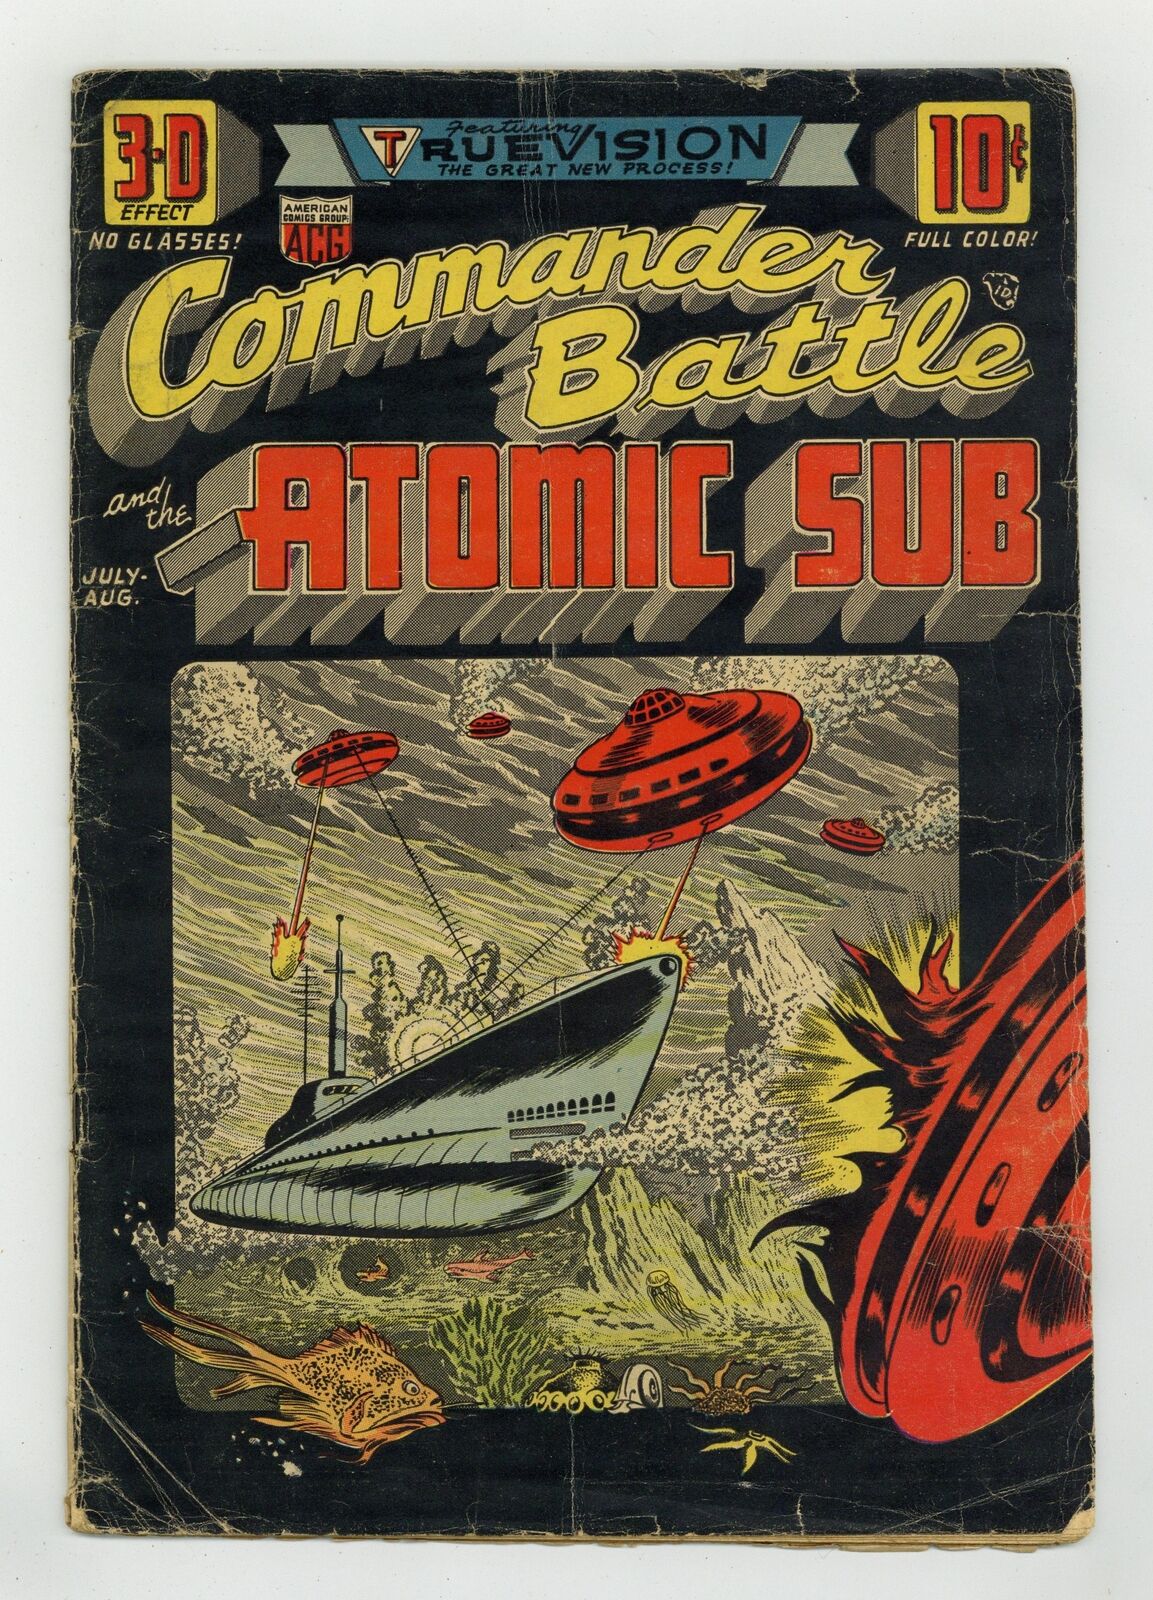 Commander Battle and the Atomic Sub #1 GD+ 2.5 1954